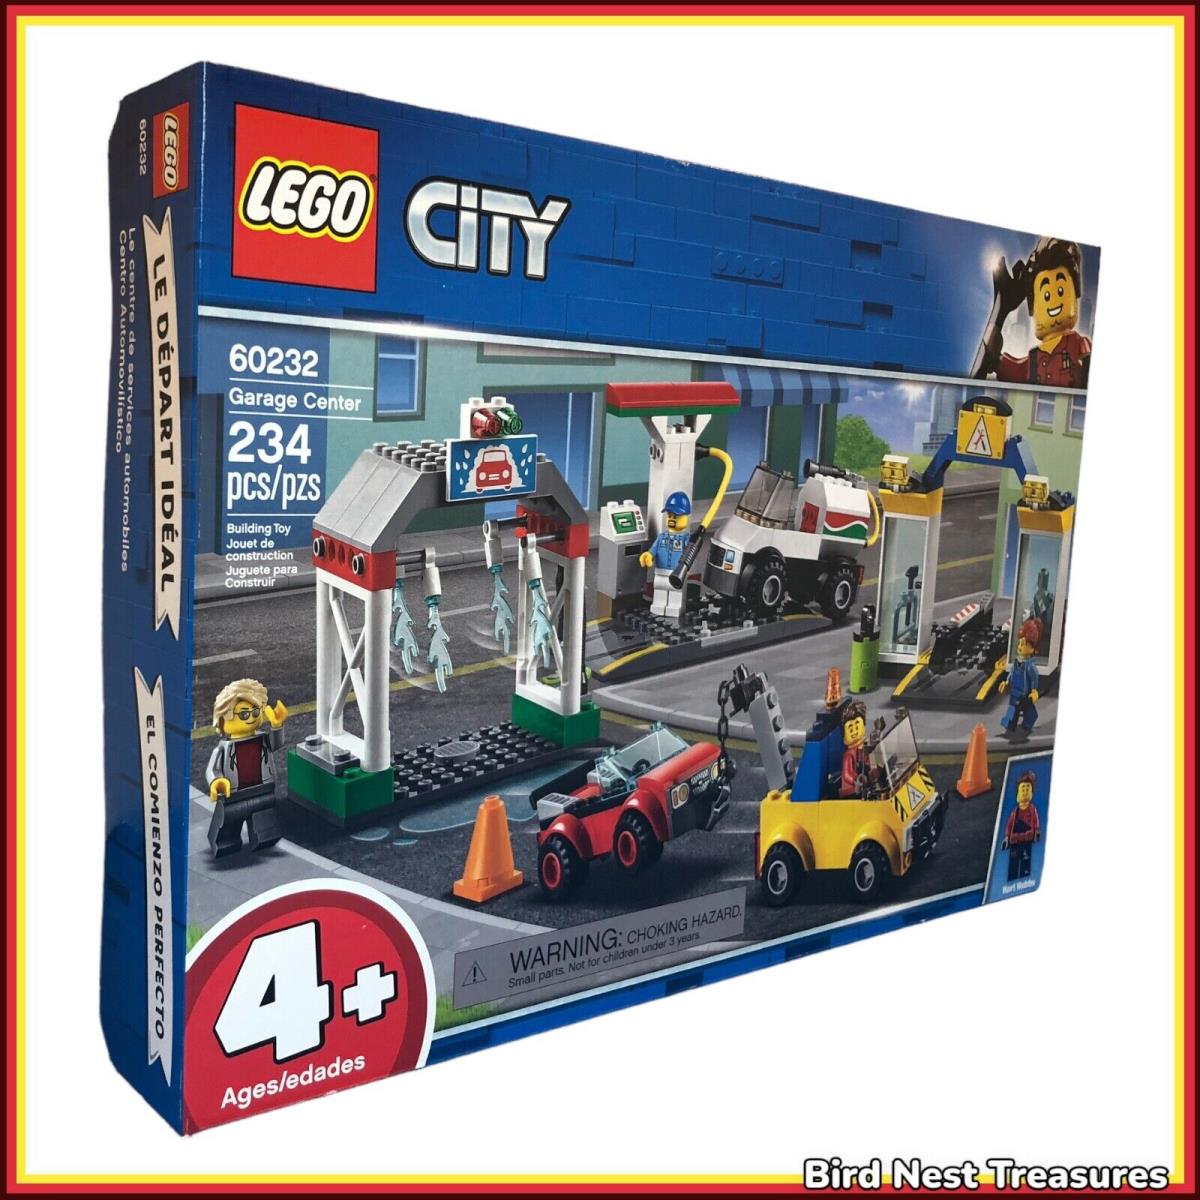 Lego 60232 City Garage Center For Ages 4+ Years 2019 - Retired